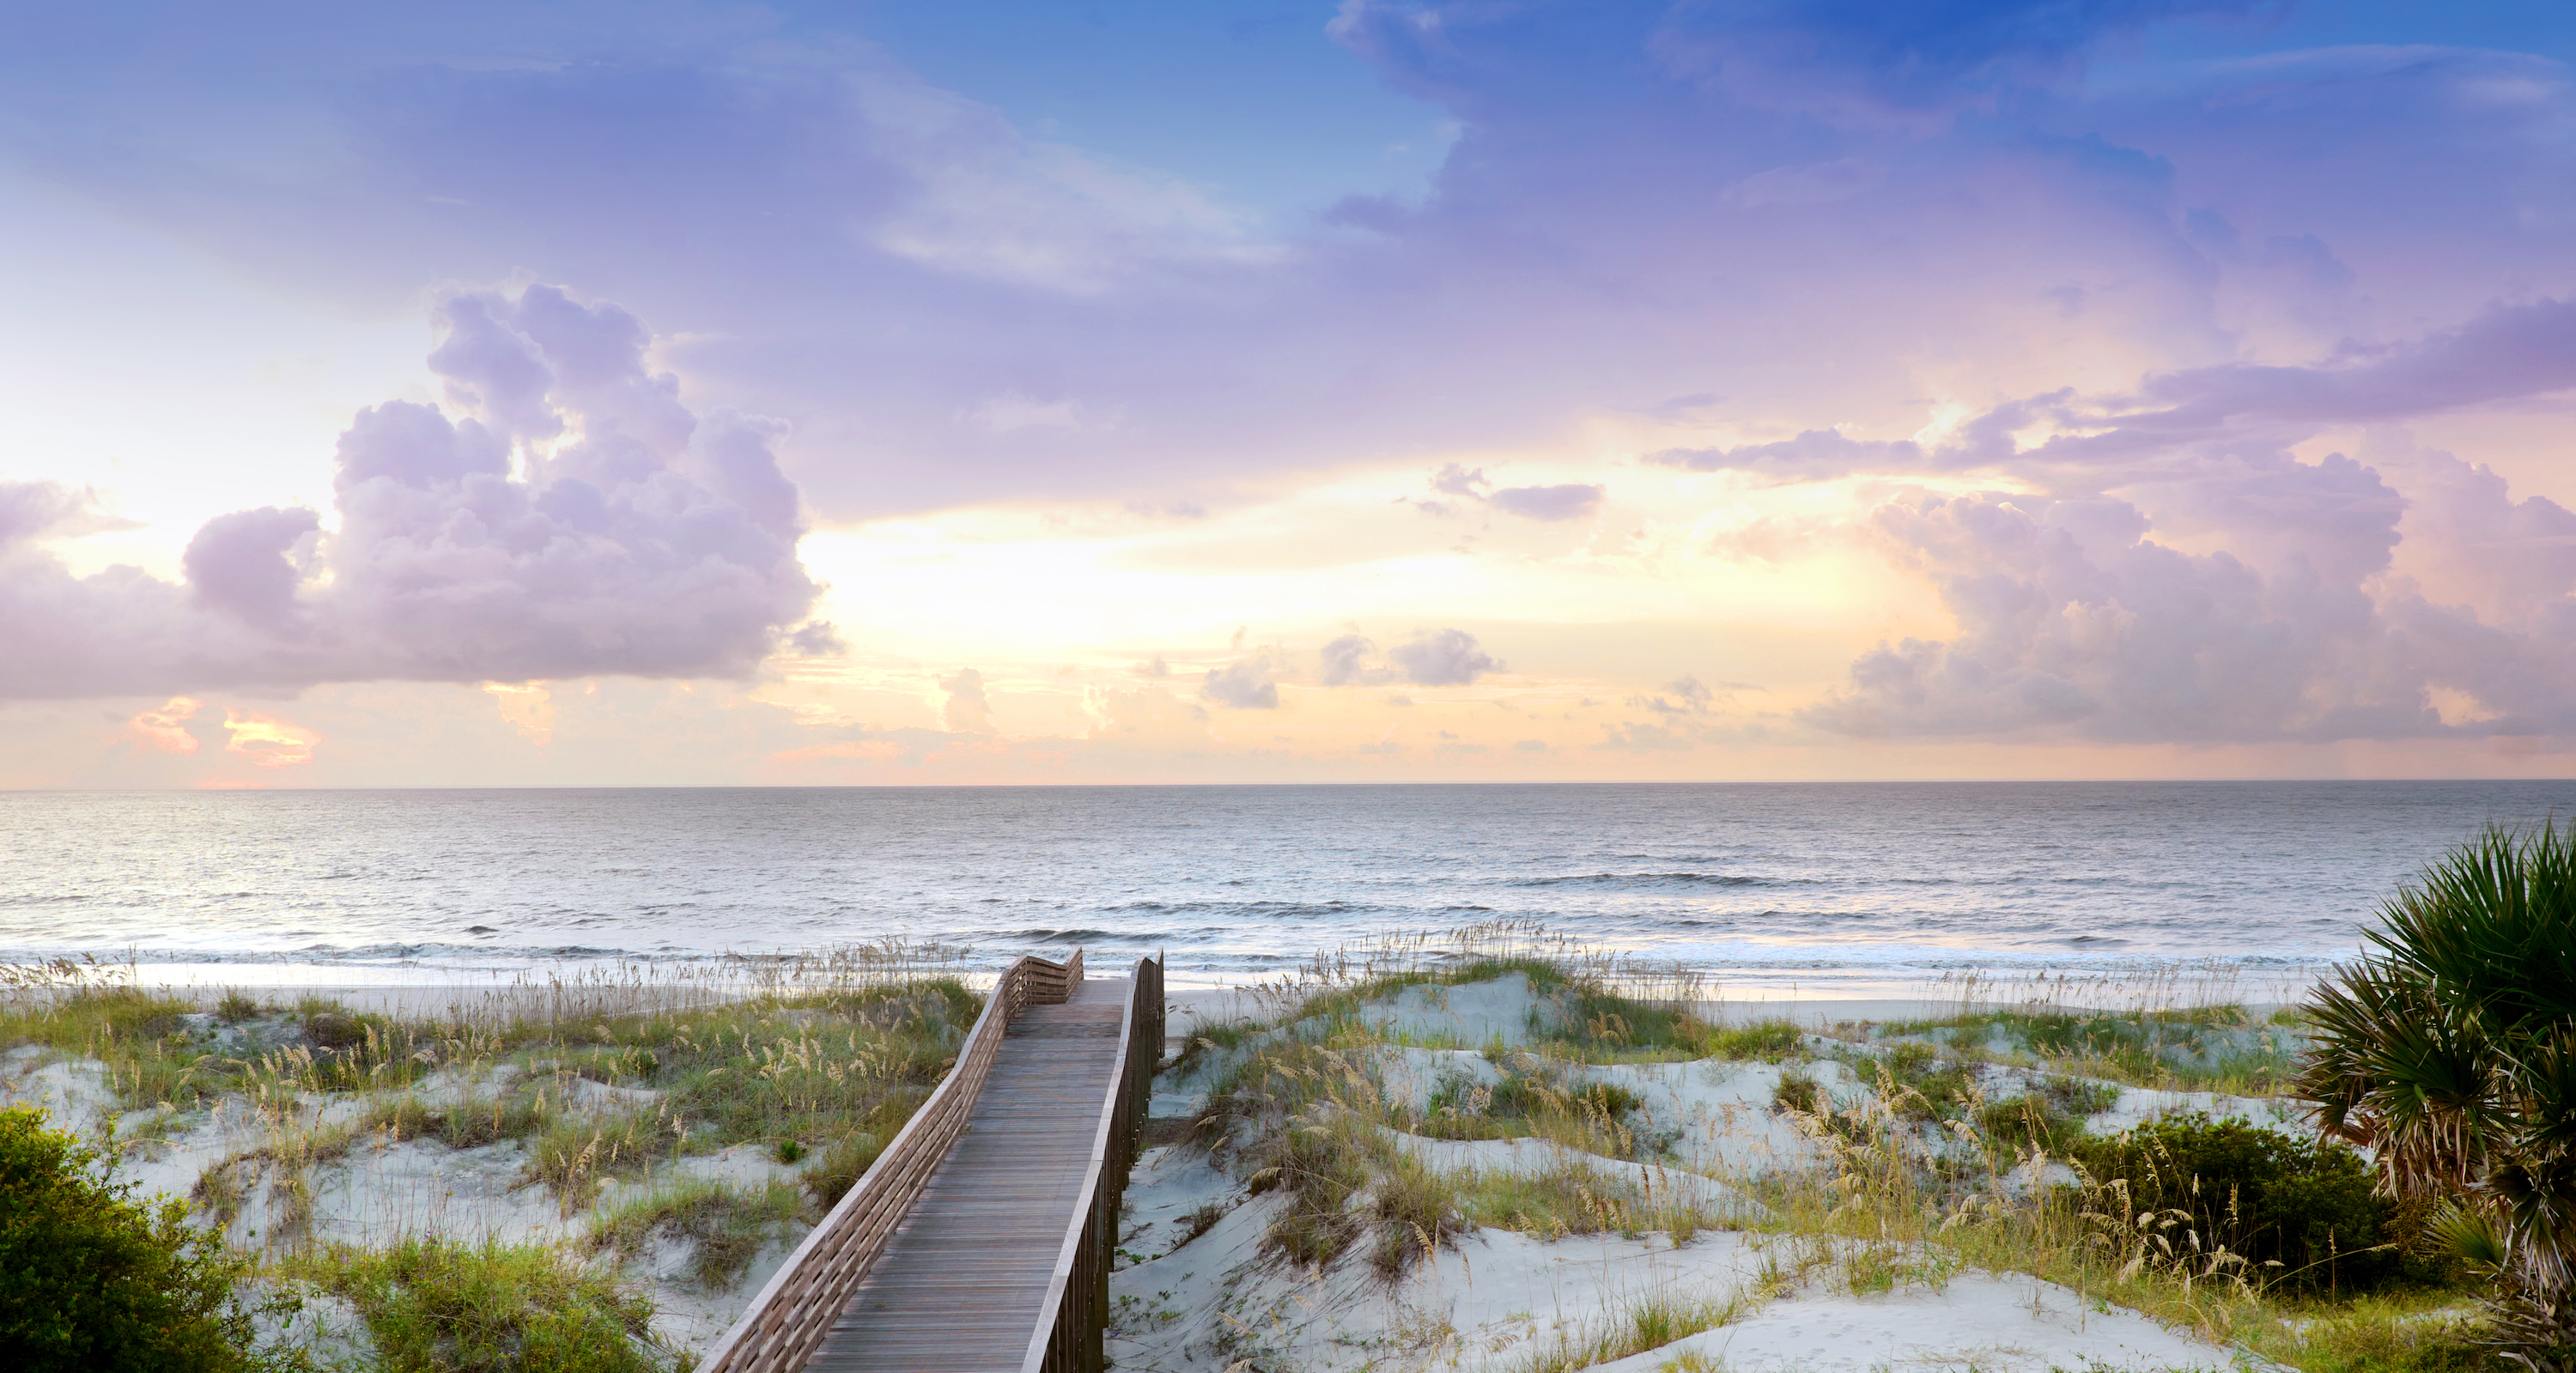 A beach and boardwalk; there is a purple and yellow sunrise